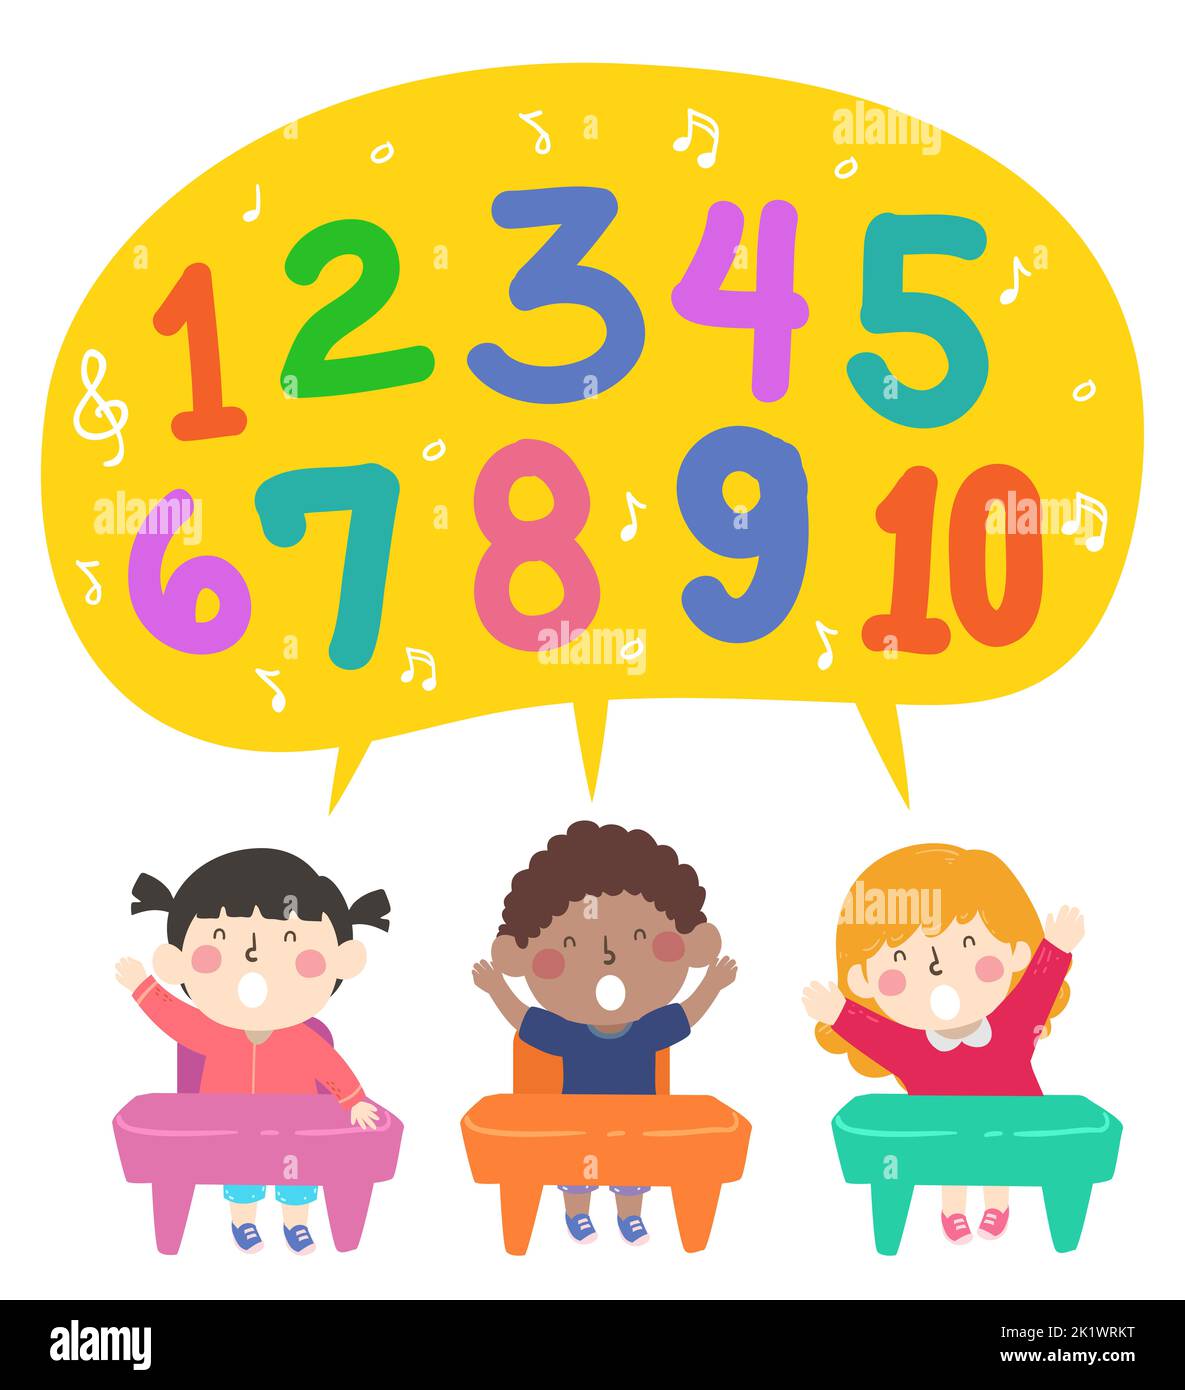 Illustration of Kids in Class Sitting Down and Singing Numbers Song Stock Photo